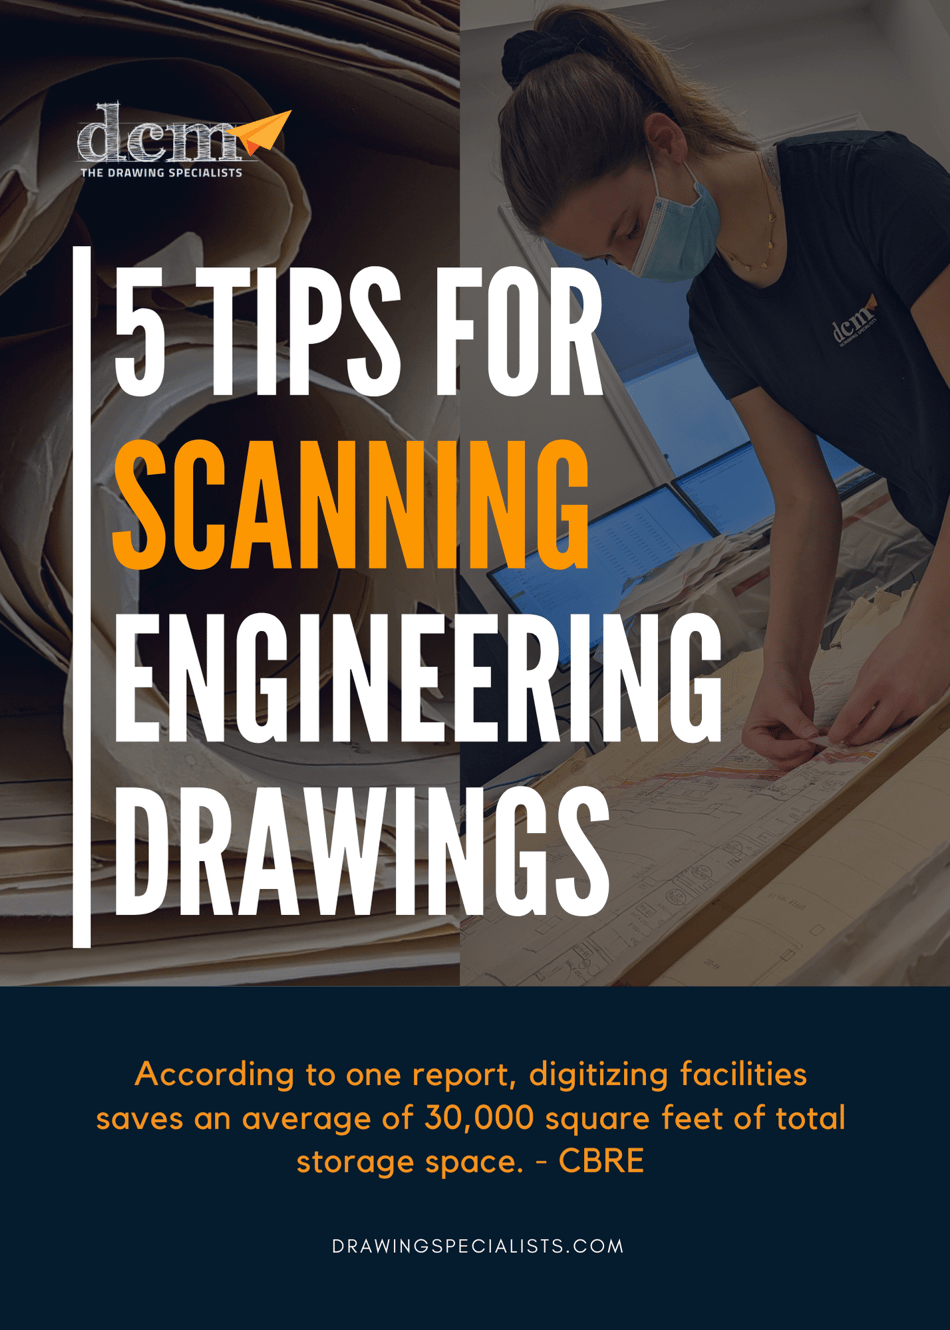 5 tips for scanning engineering drawings - Title Page